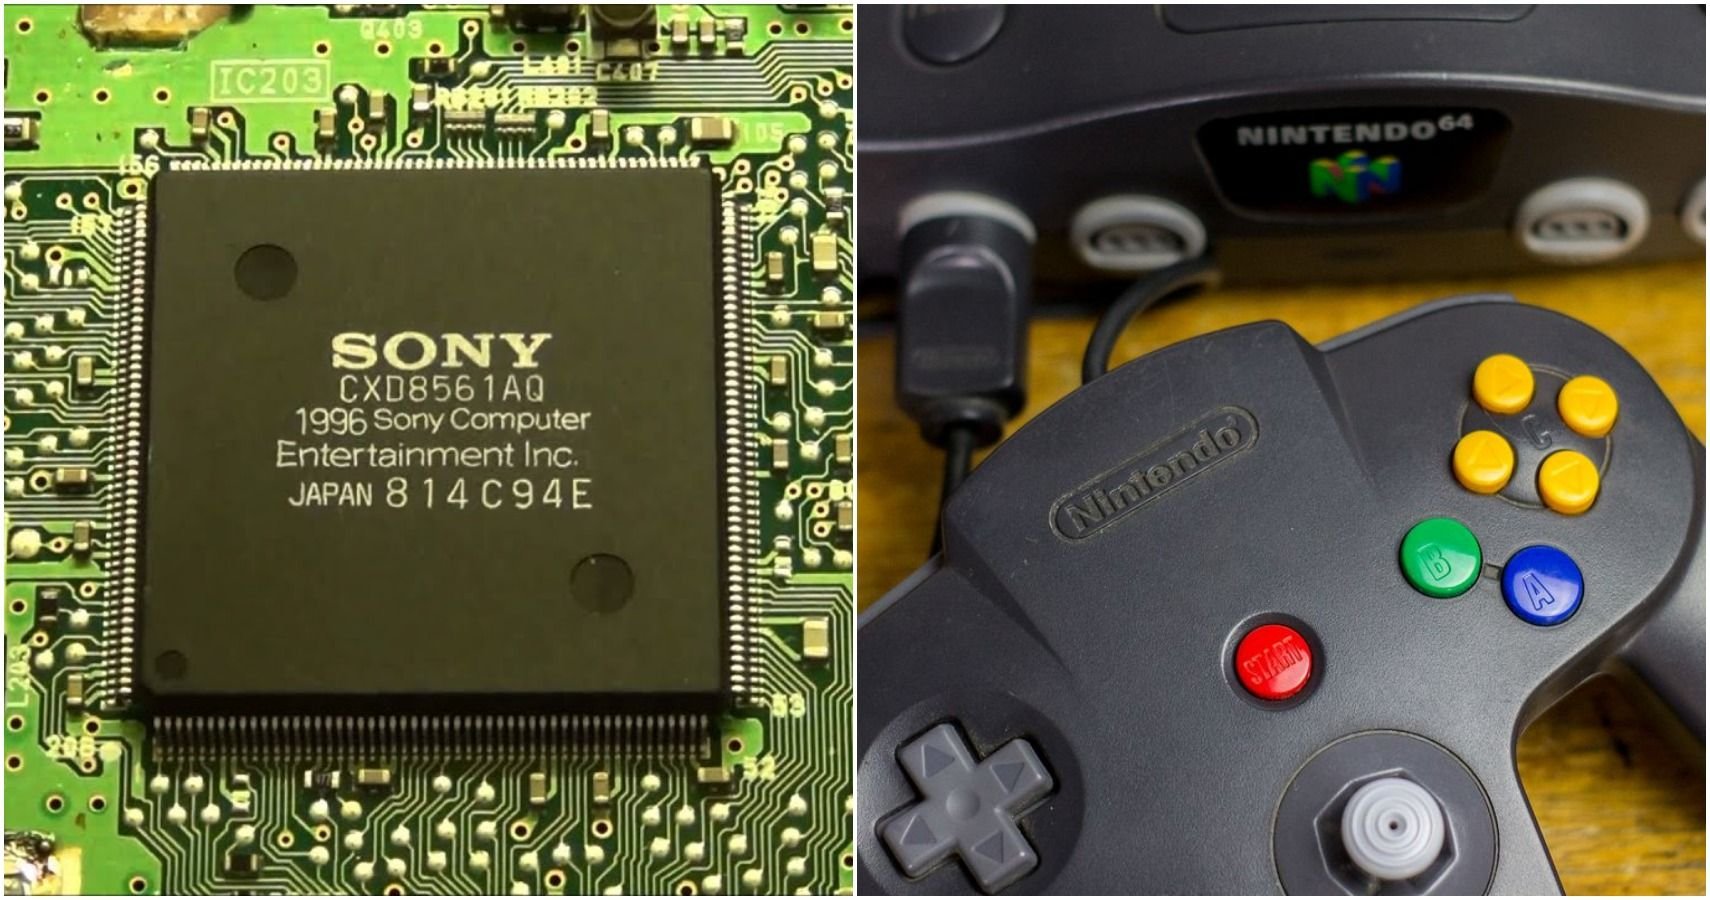 N64 Vs. PS1: Which Console Is More Powerful (In Terms Of Tech Specs)